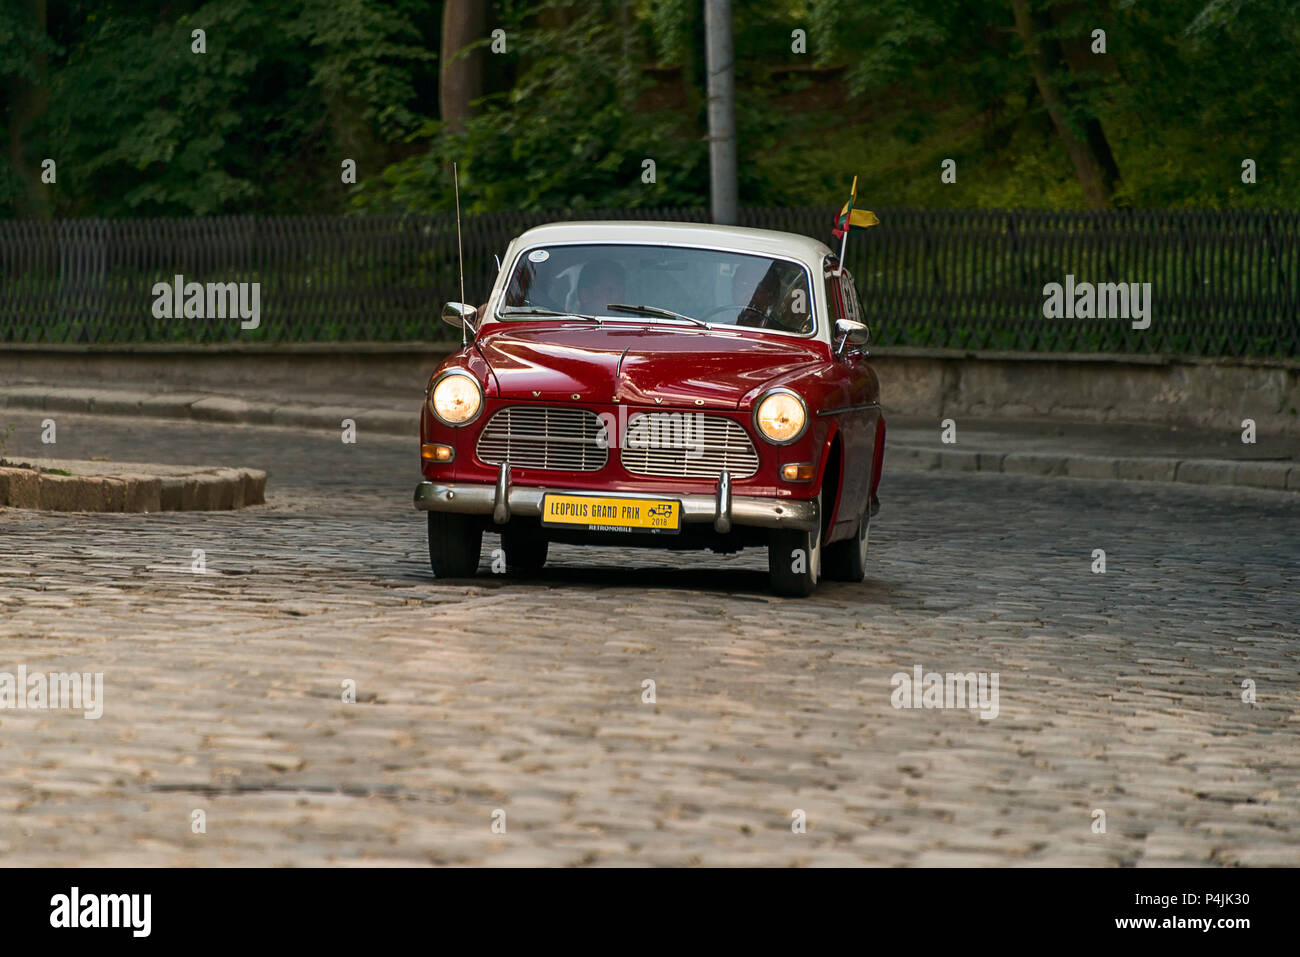 Volvo 13134 High Resolution Stock Photography and Images - Alamy